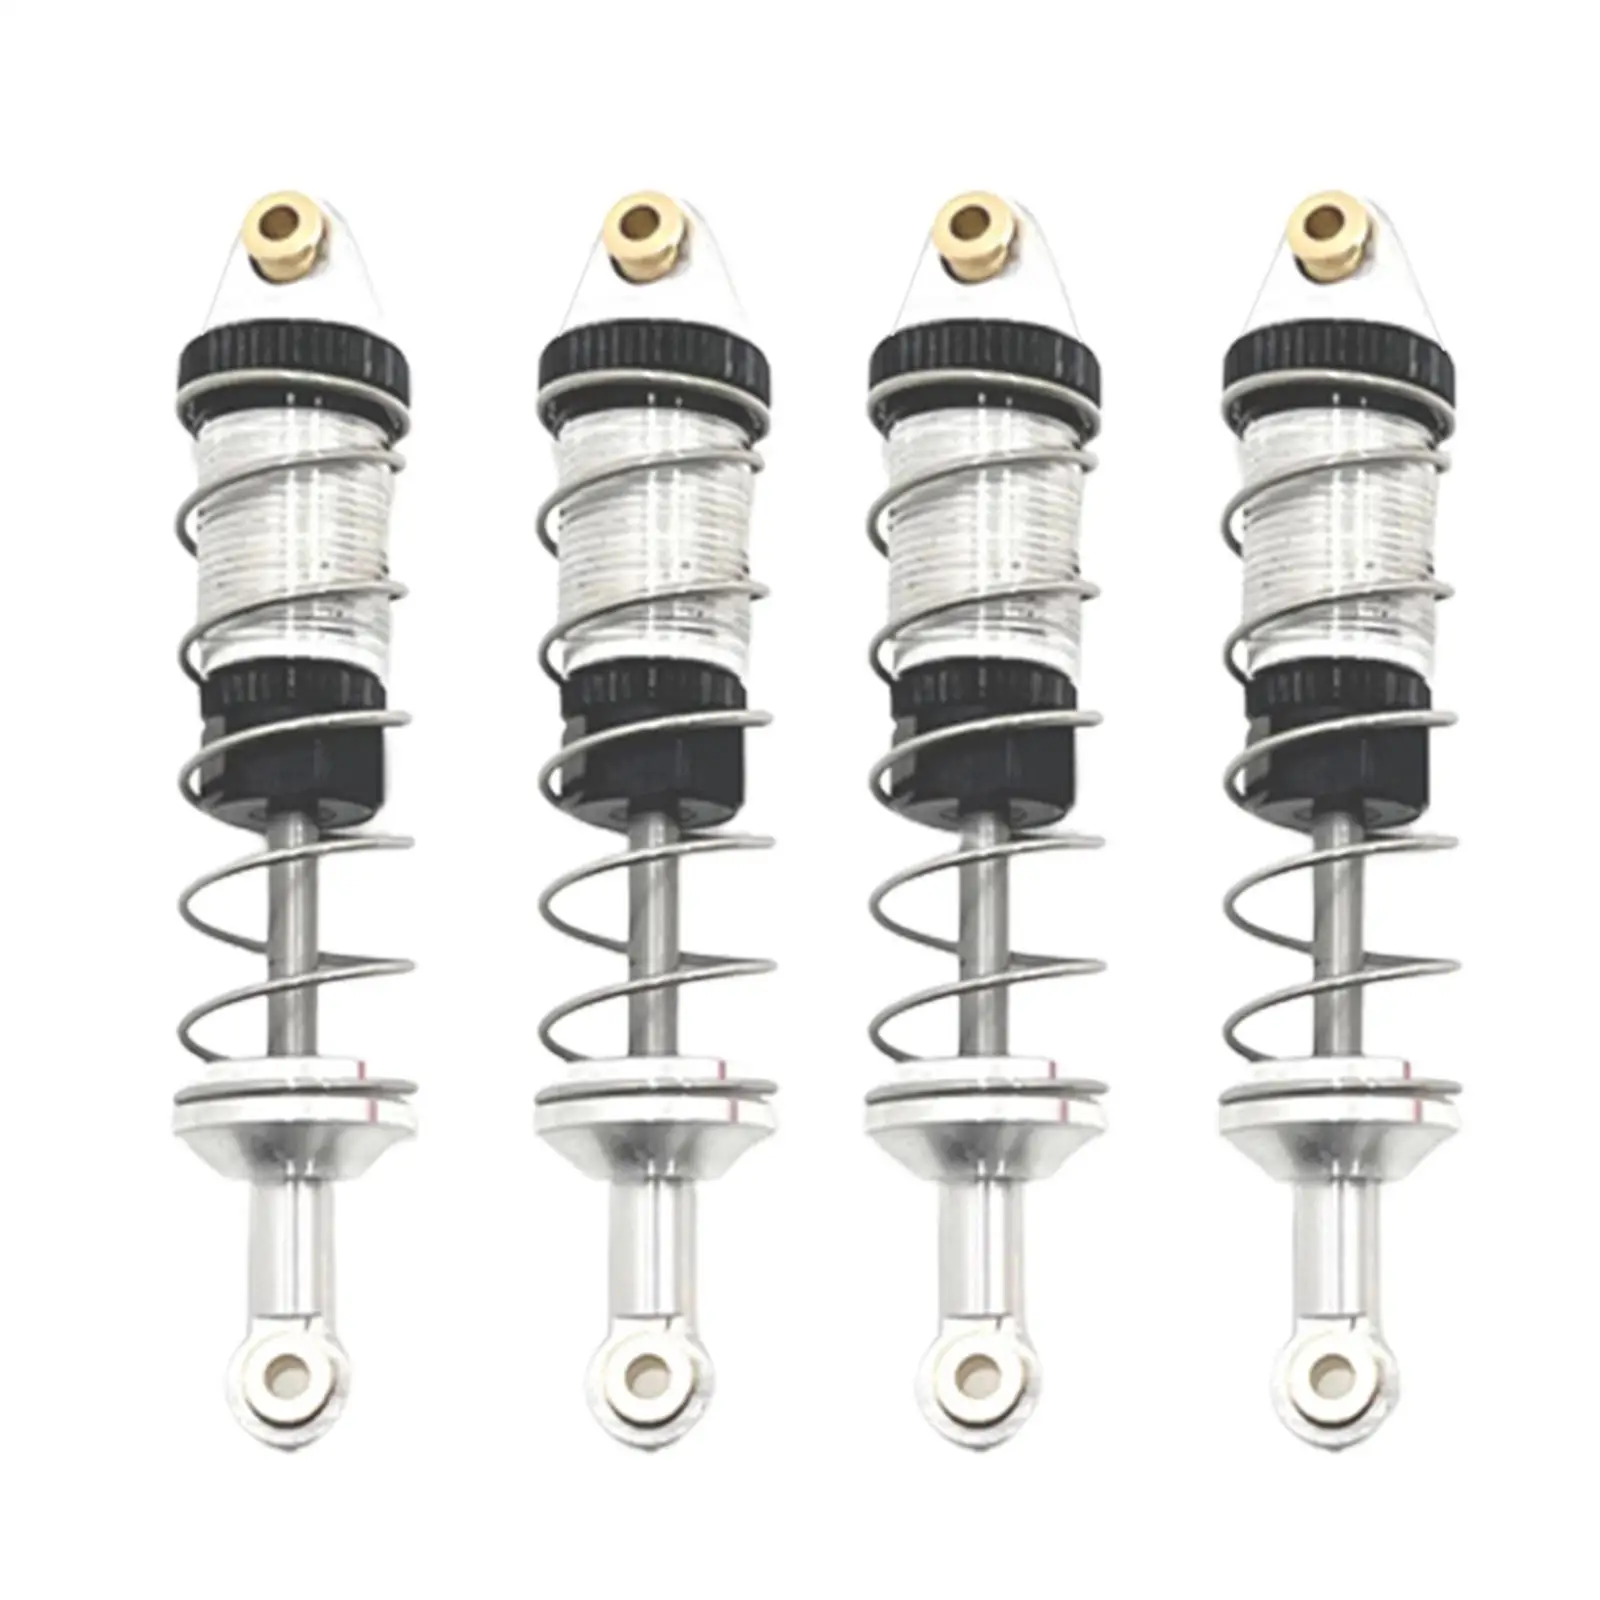 4 Pieces 1:16 Scale Metal RC Car Shock Absorber for 16207 16210 H6 16209